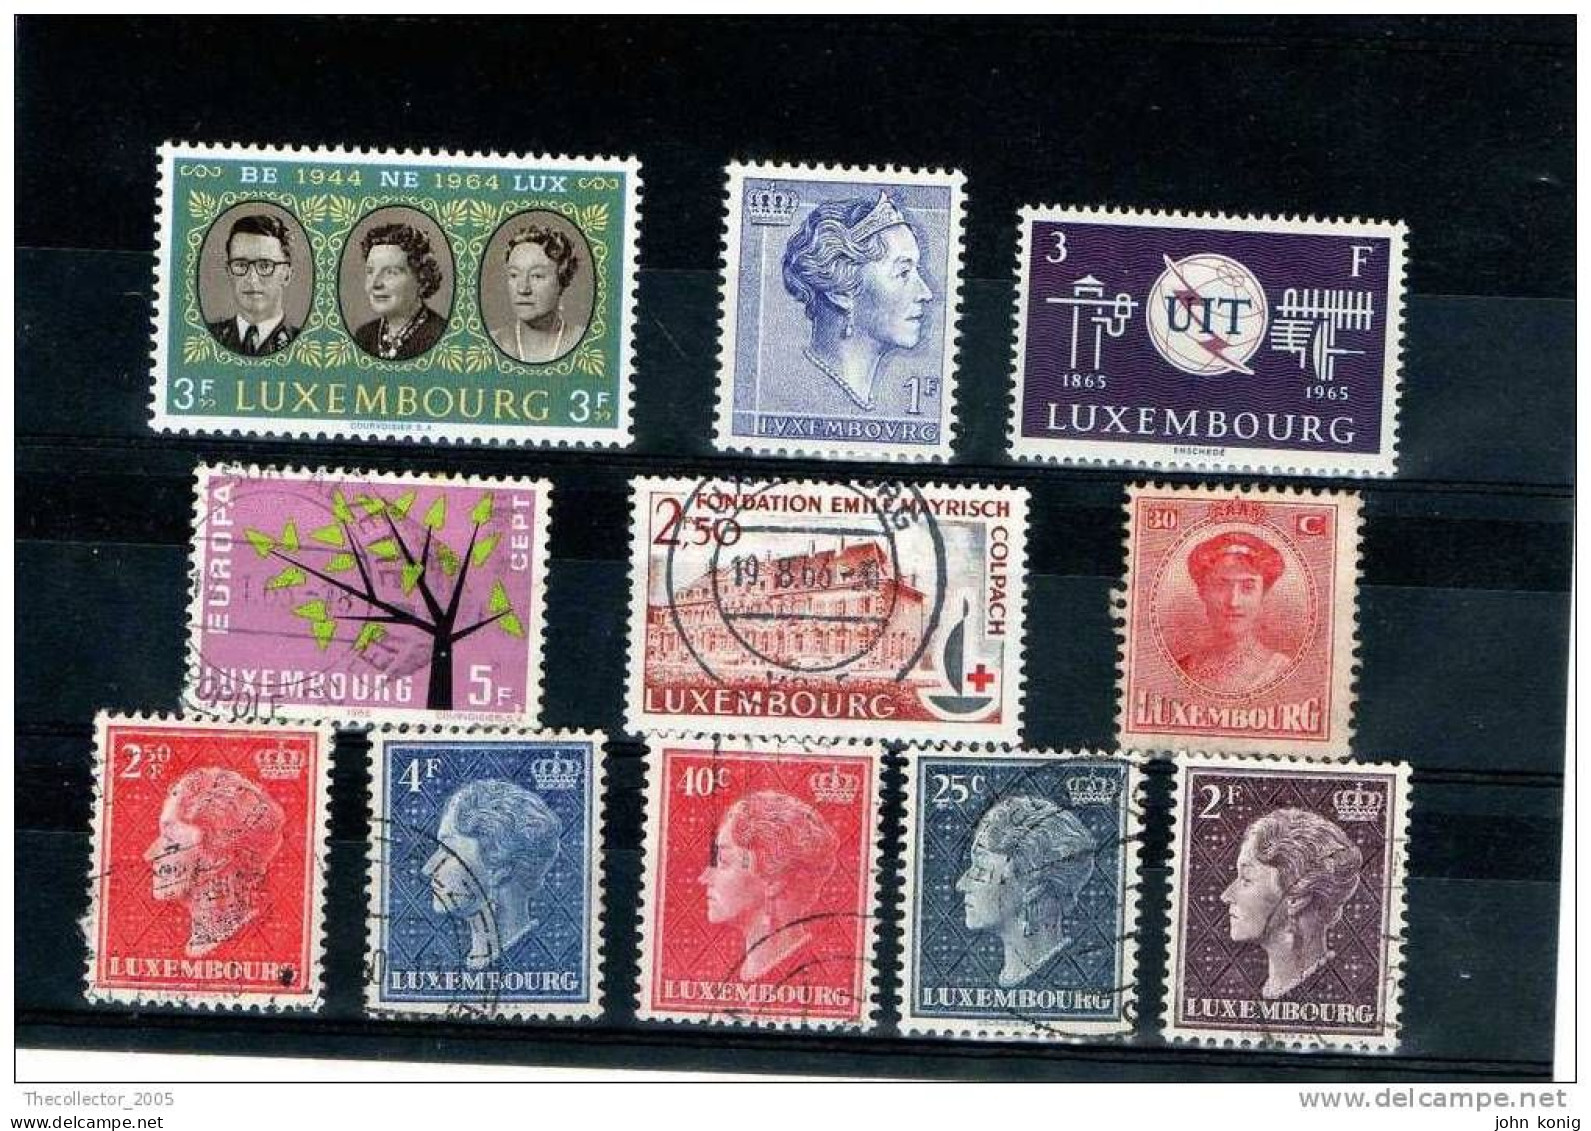 Lussemburgo - Luxembourg - Lotto Francobolli - Stamps Lot - Collections